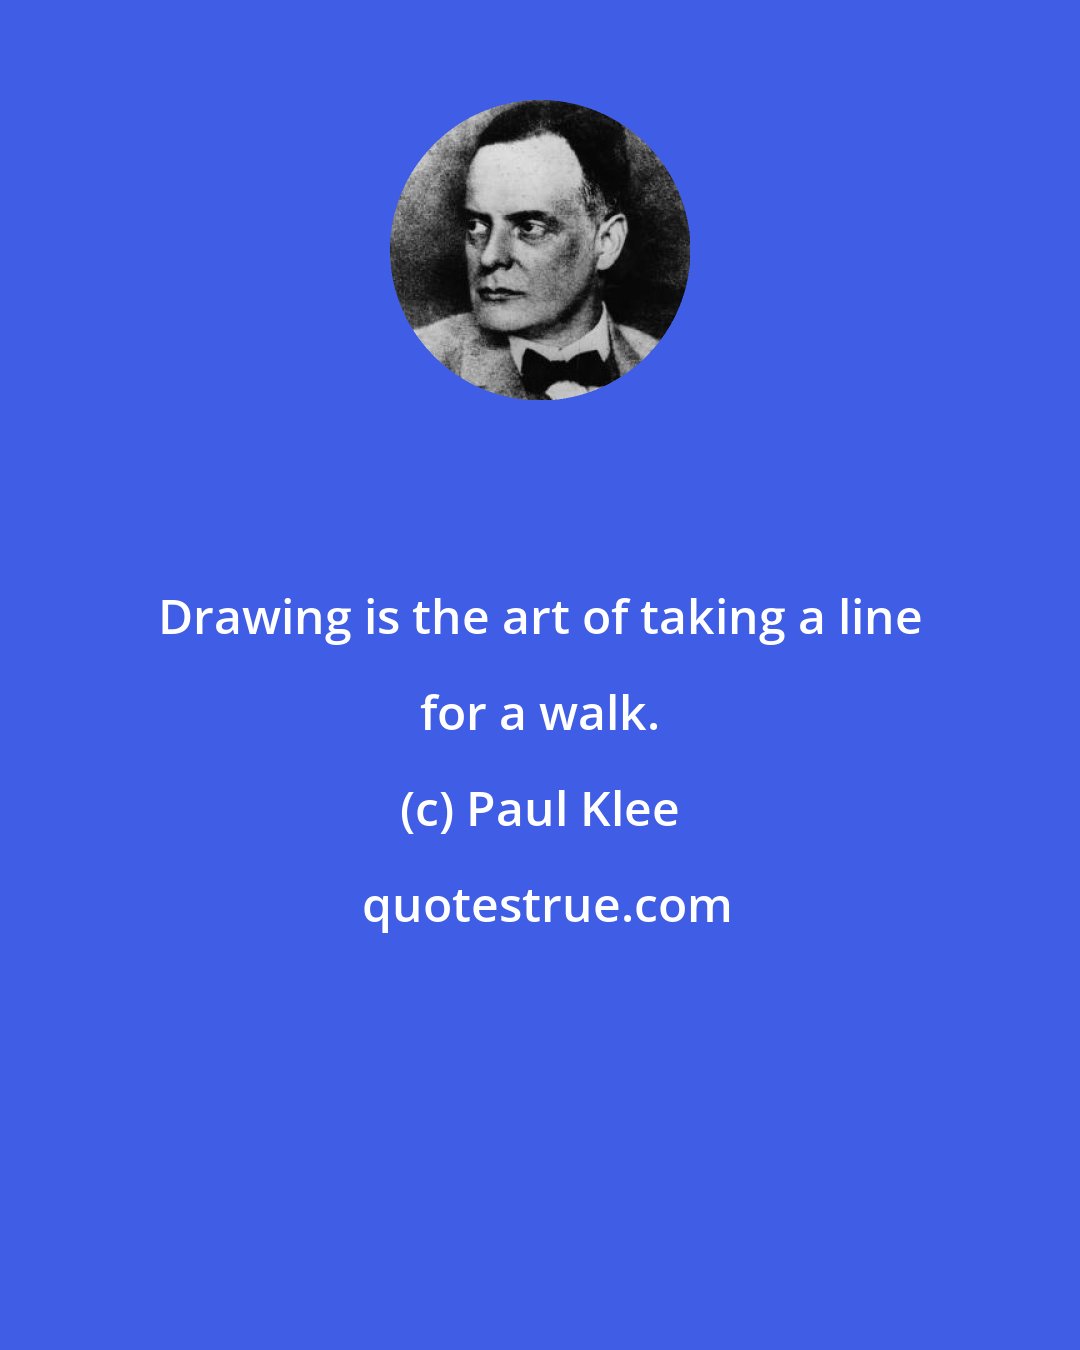 Paul Klee: Drawing is the art of taking a line for a walk.